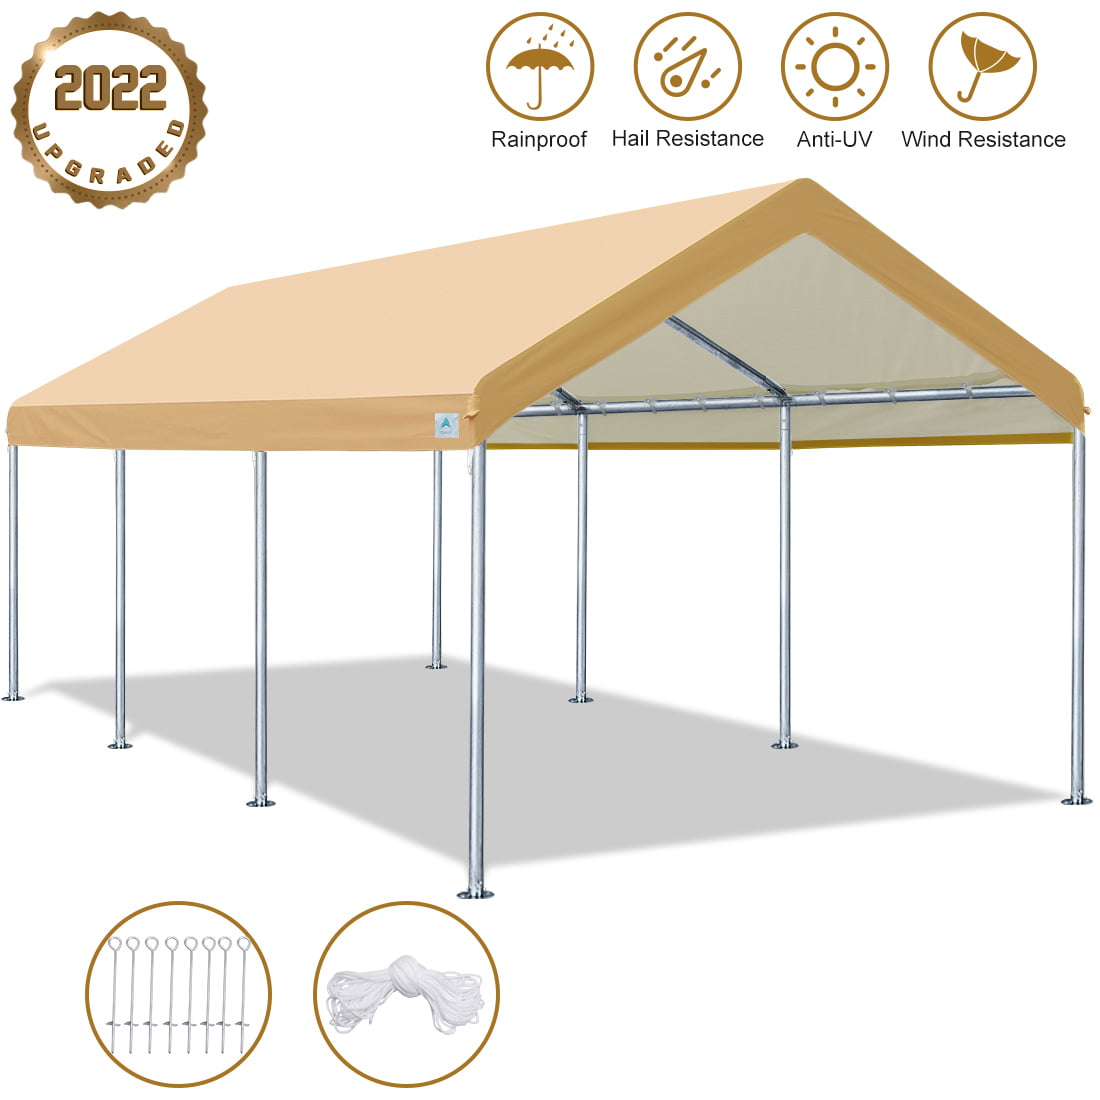 Carport Shelter Port Tent Canopy Heavy Duty Steel Frame Car Boat Protector 10x20 